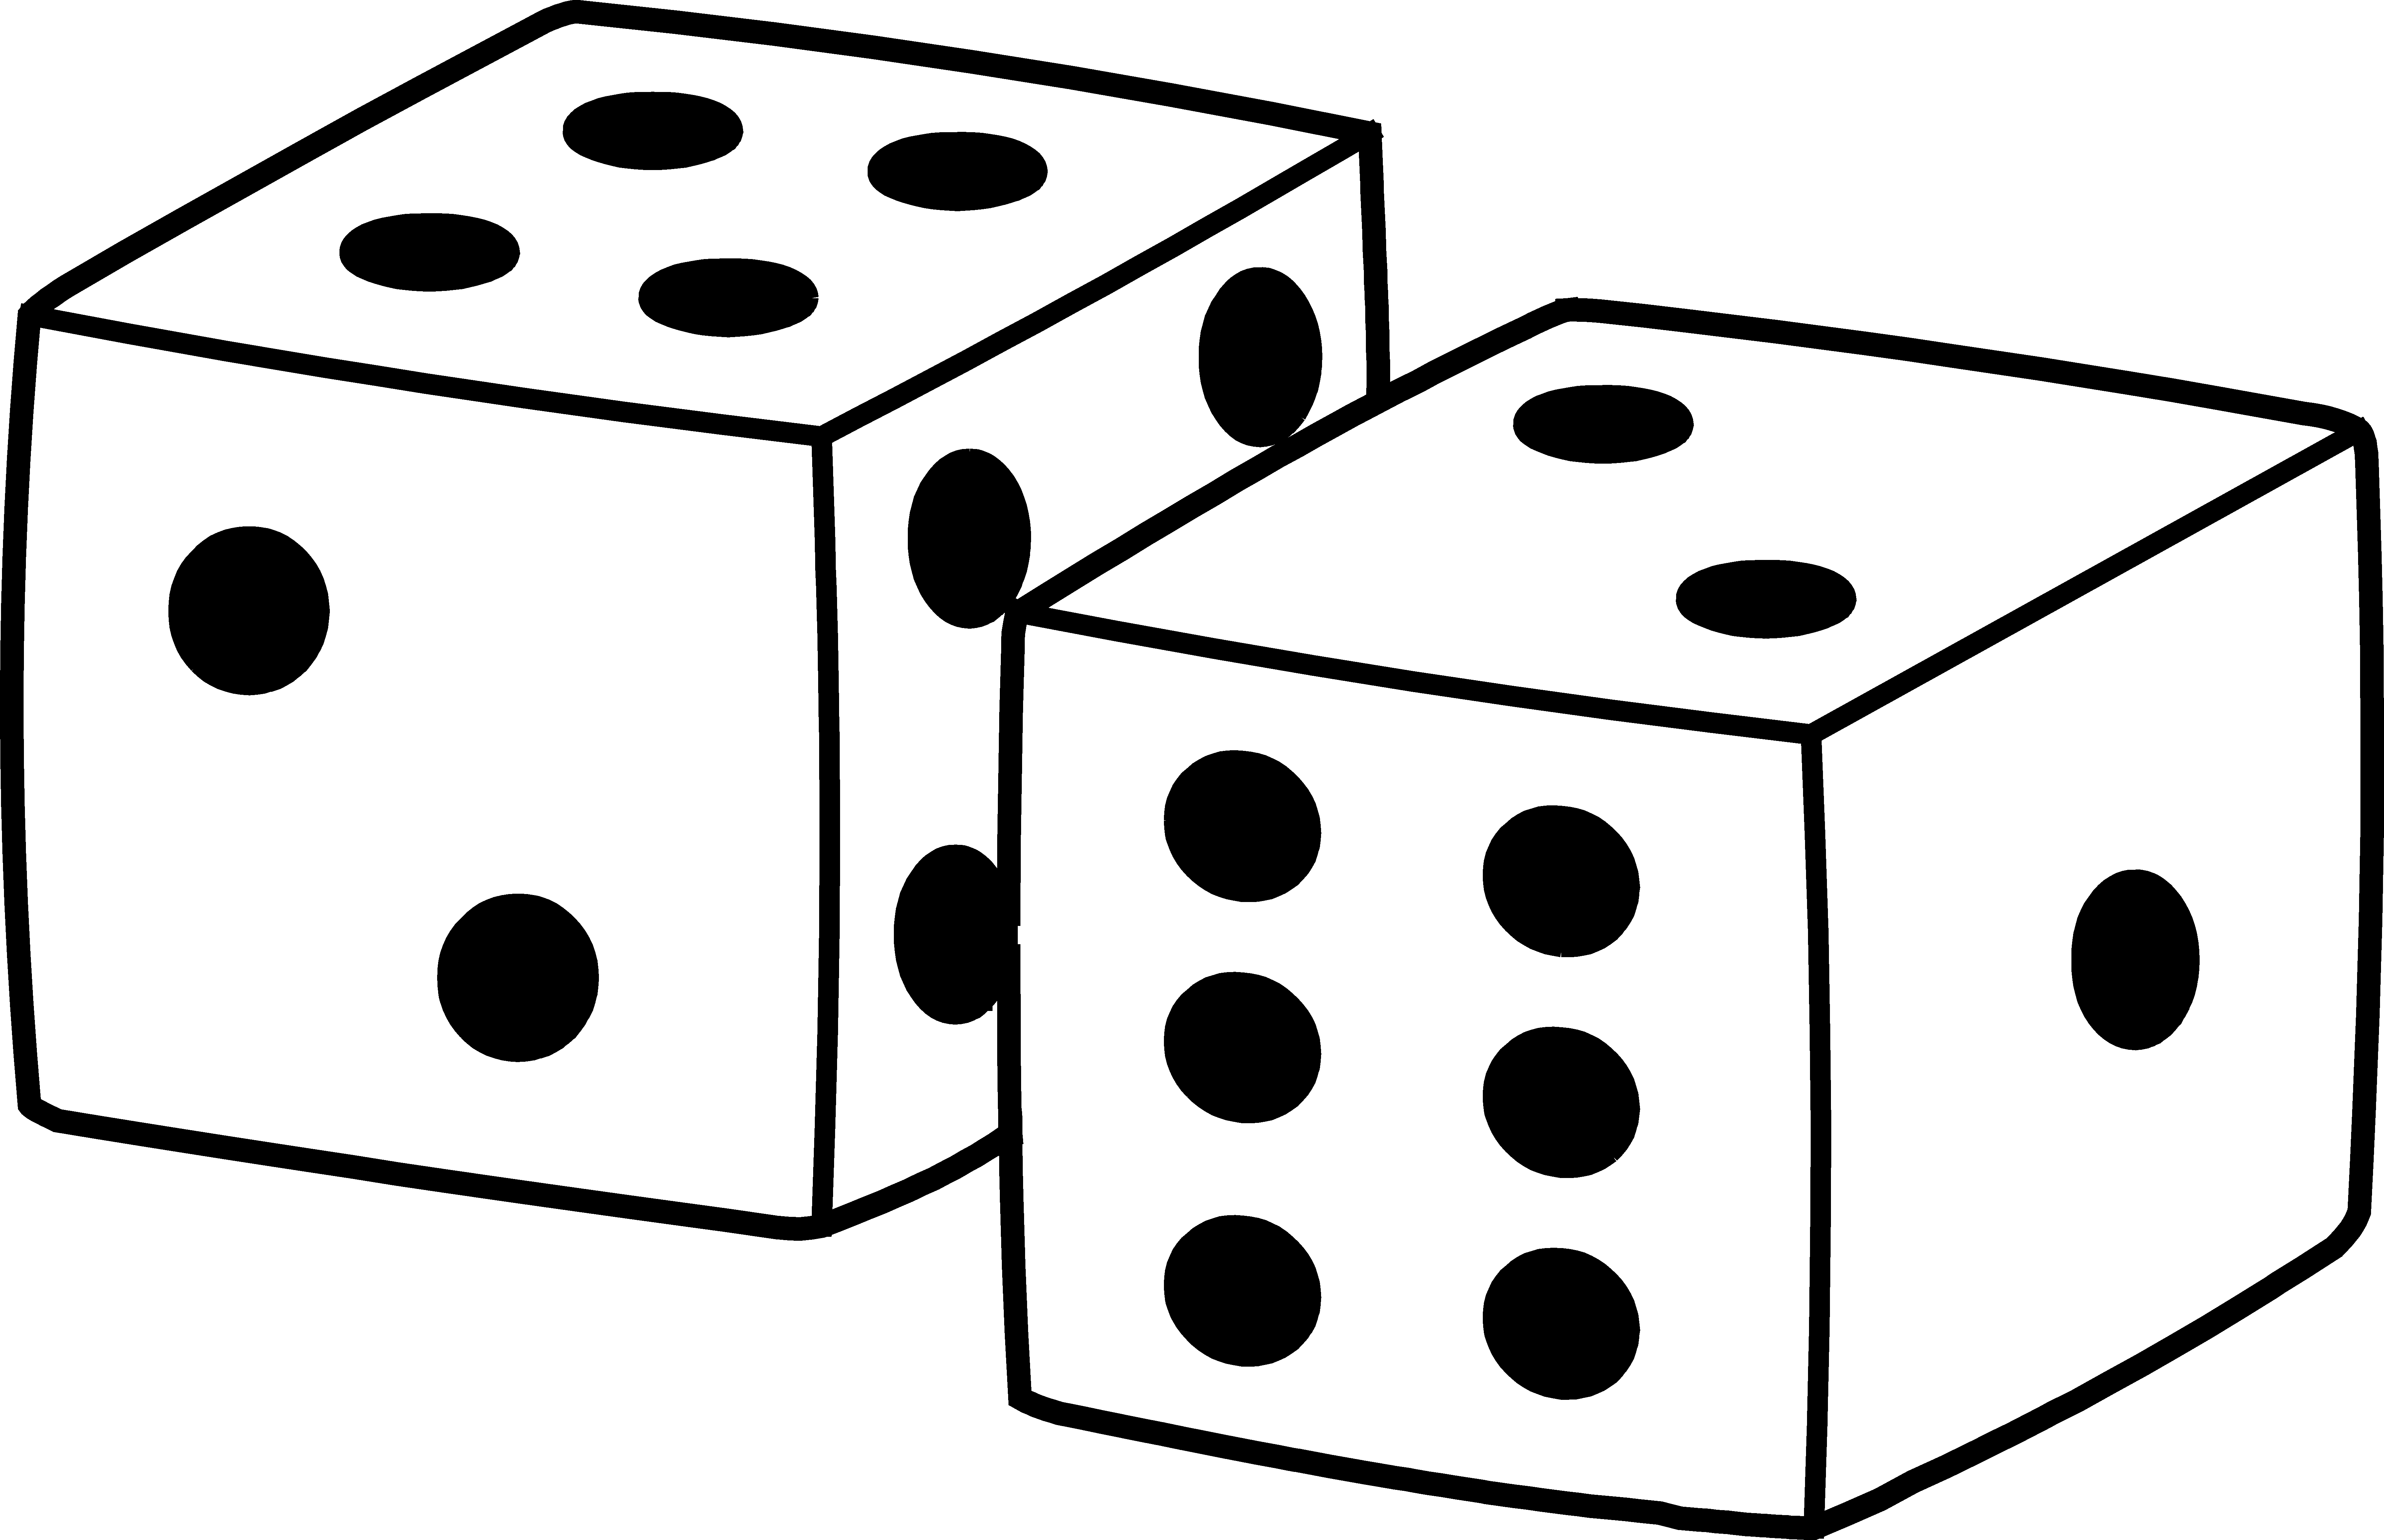 Free Dice Images Free, Download Free Dice Images Free png images, Free